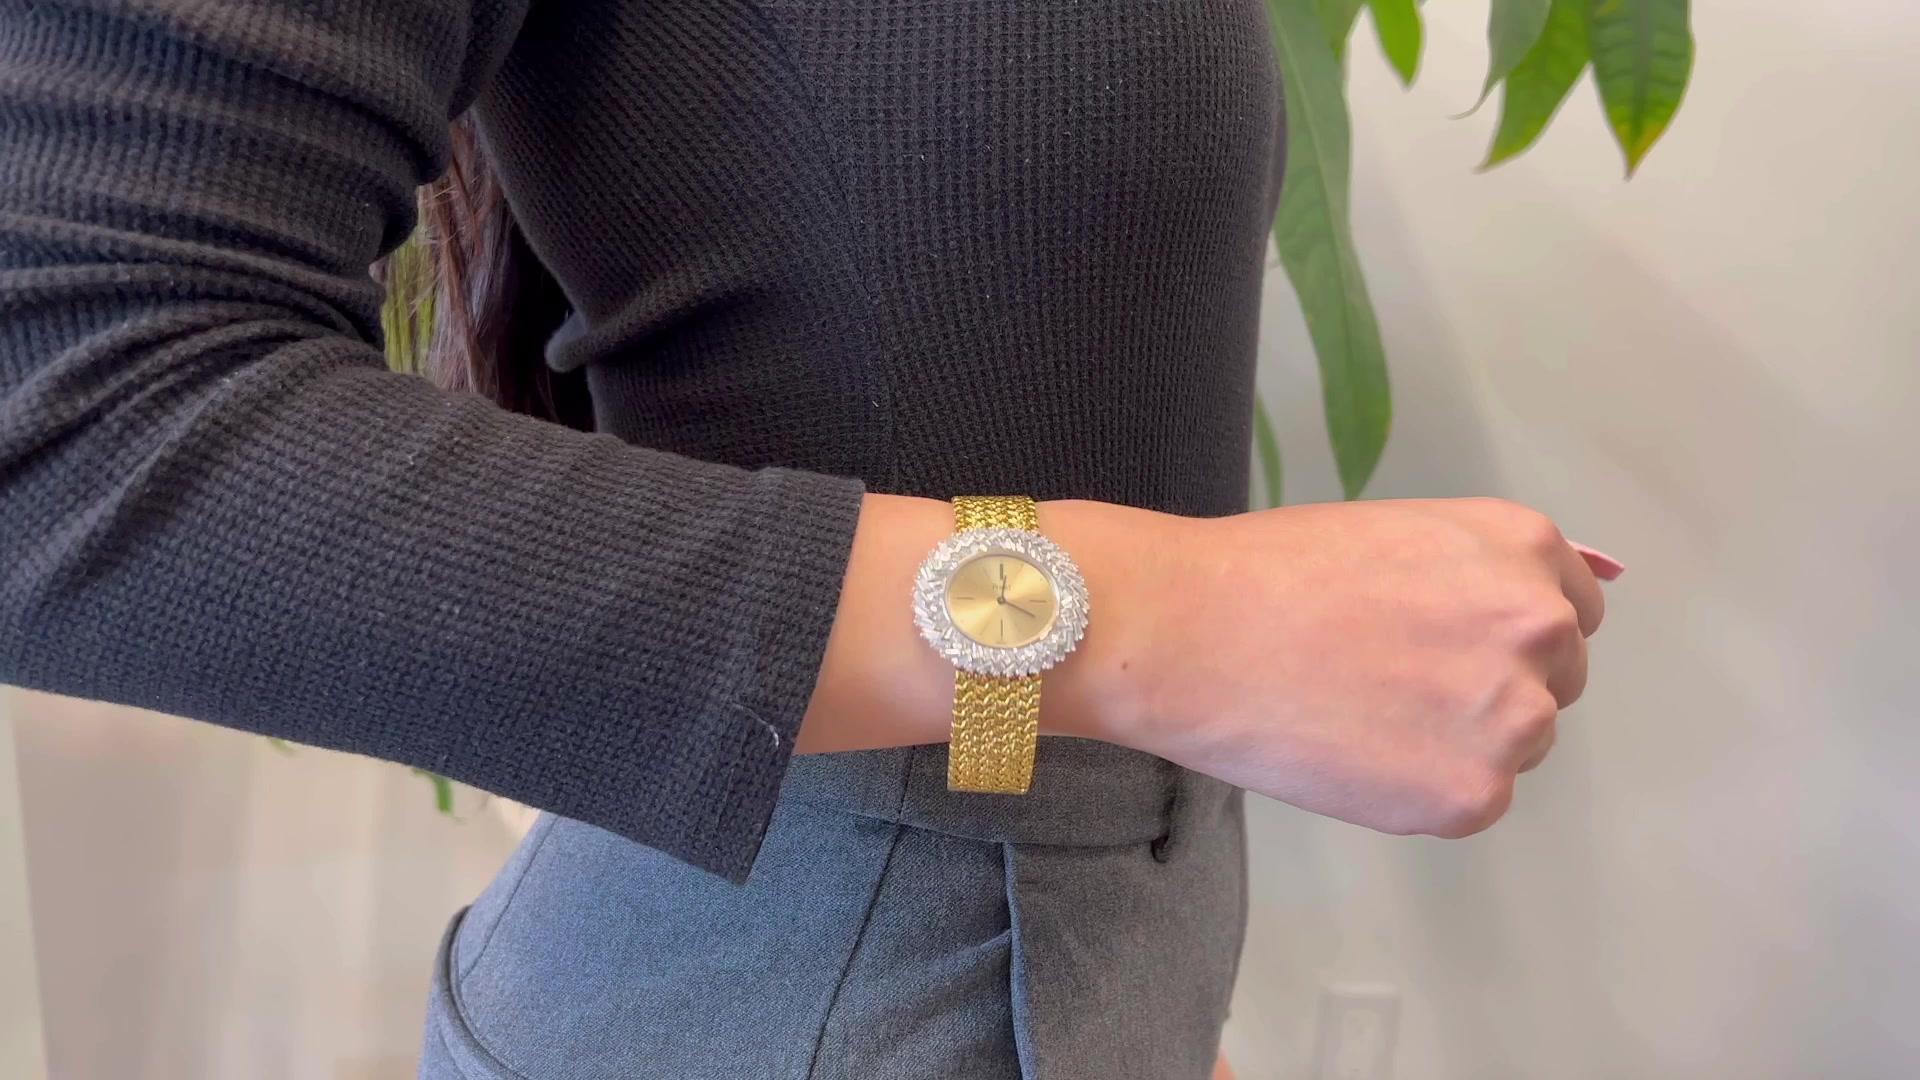 One Vintage Piaget Diamond 18 Karat Yellow Gold Wristwatch. Featuring 72 tapered baguette cut diamonds with a total weight of approximately 4.50 carats, graded F color, VS clarity. Crafted in 18 karat yellow gold and white gold signed Piaget, serial